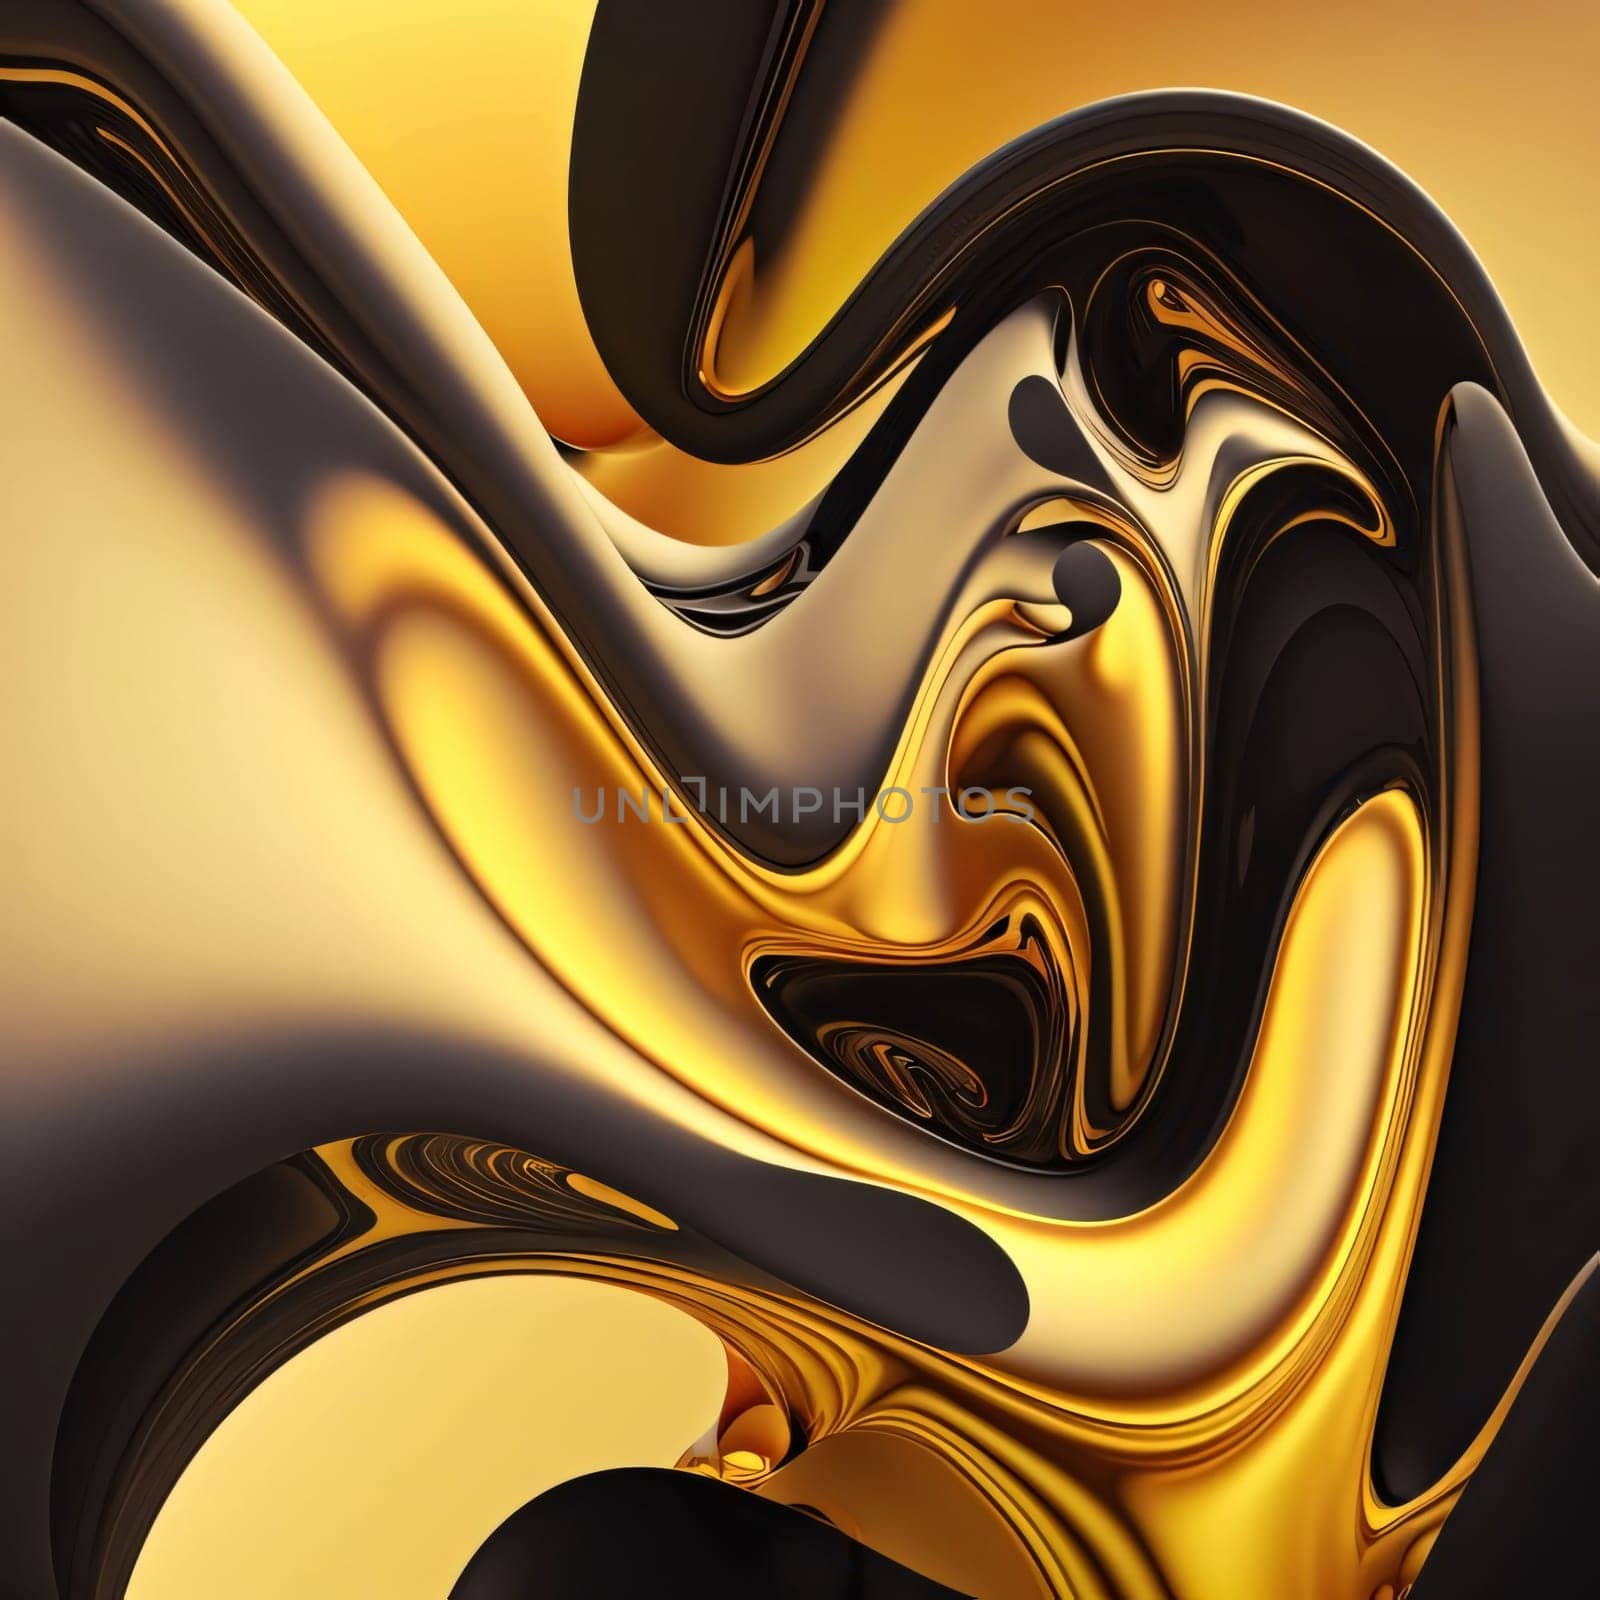 Abstract background design: 3d rendering of abstract gold and black background with smooth lines in it